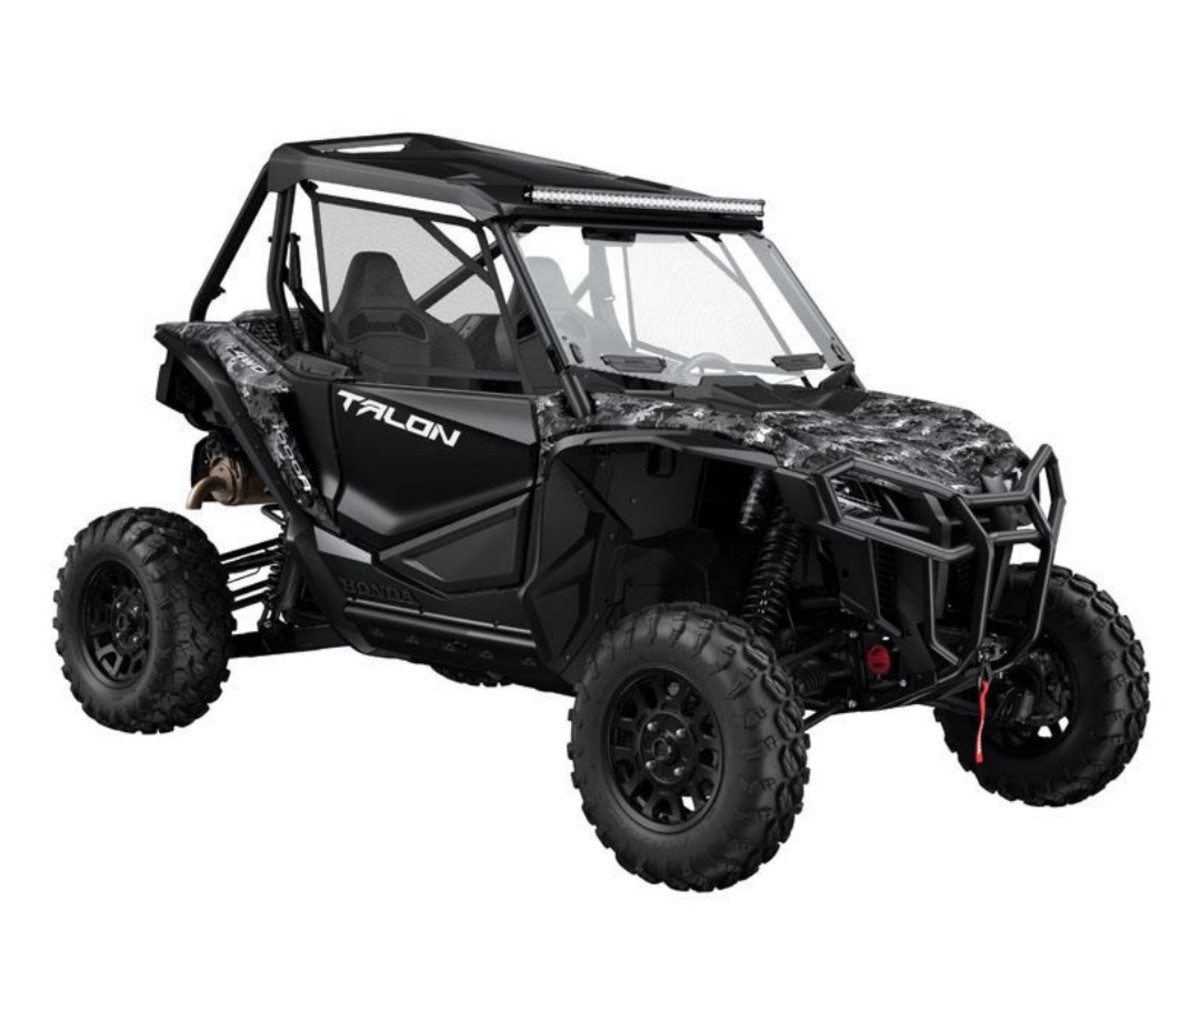 Honda Talon 1000R Special Edition in black on a white background. side-by-side UTVs